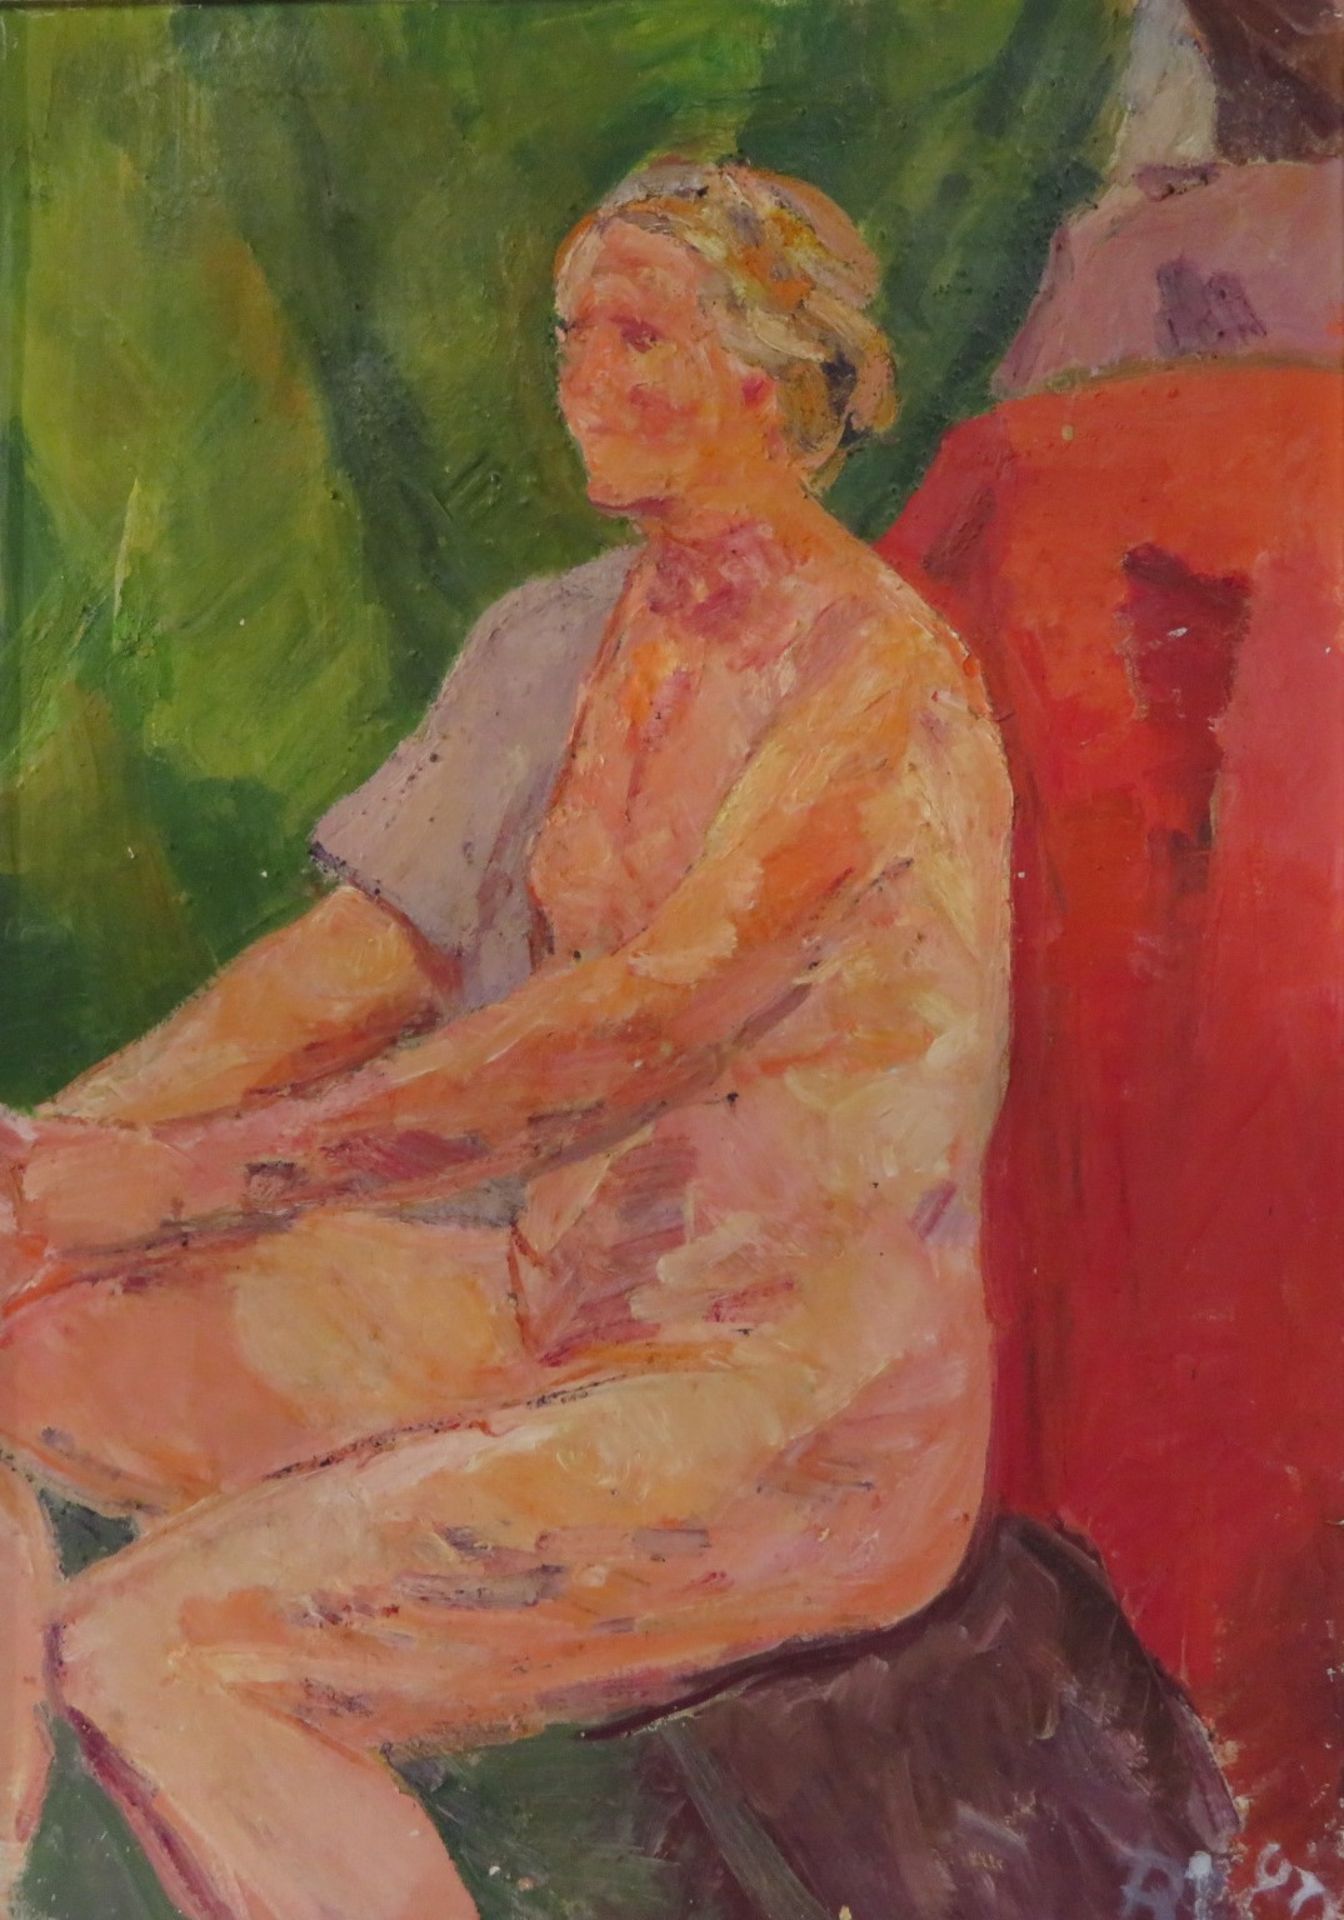 Sommer-Leypold, Rose, 1909 - 2003, Schramberg - Immenstaad,